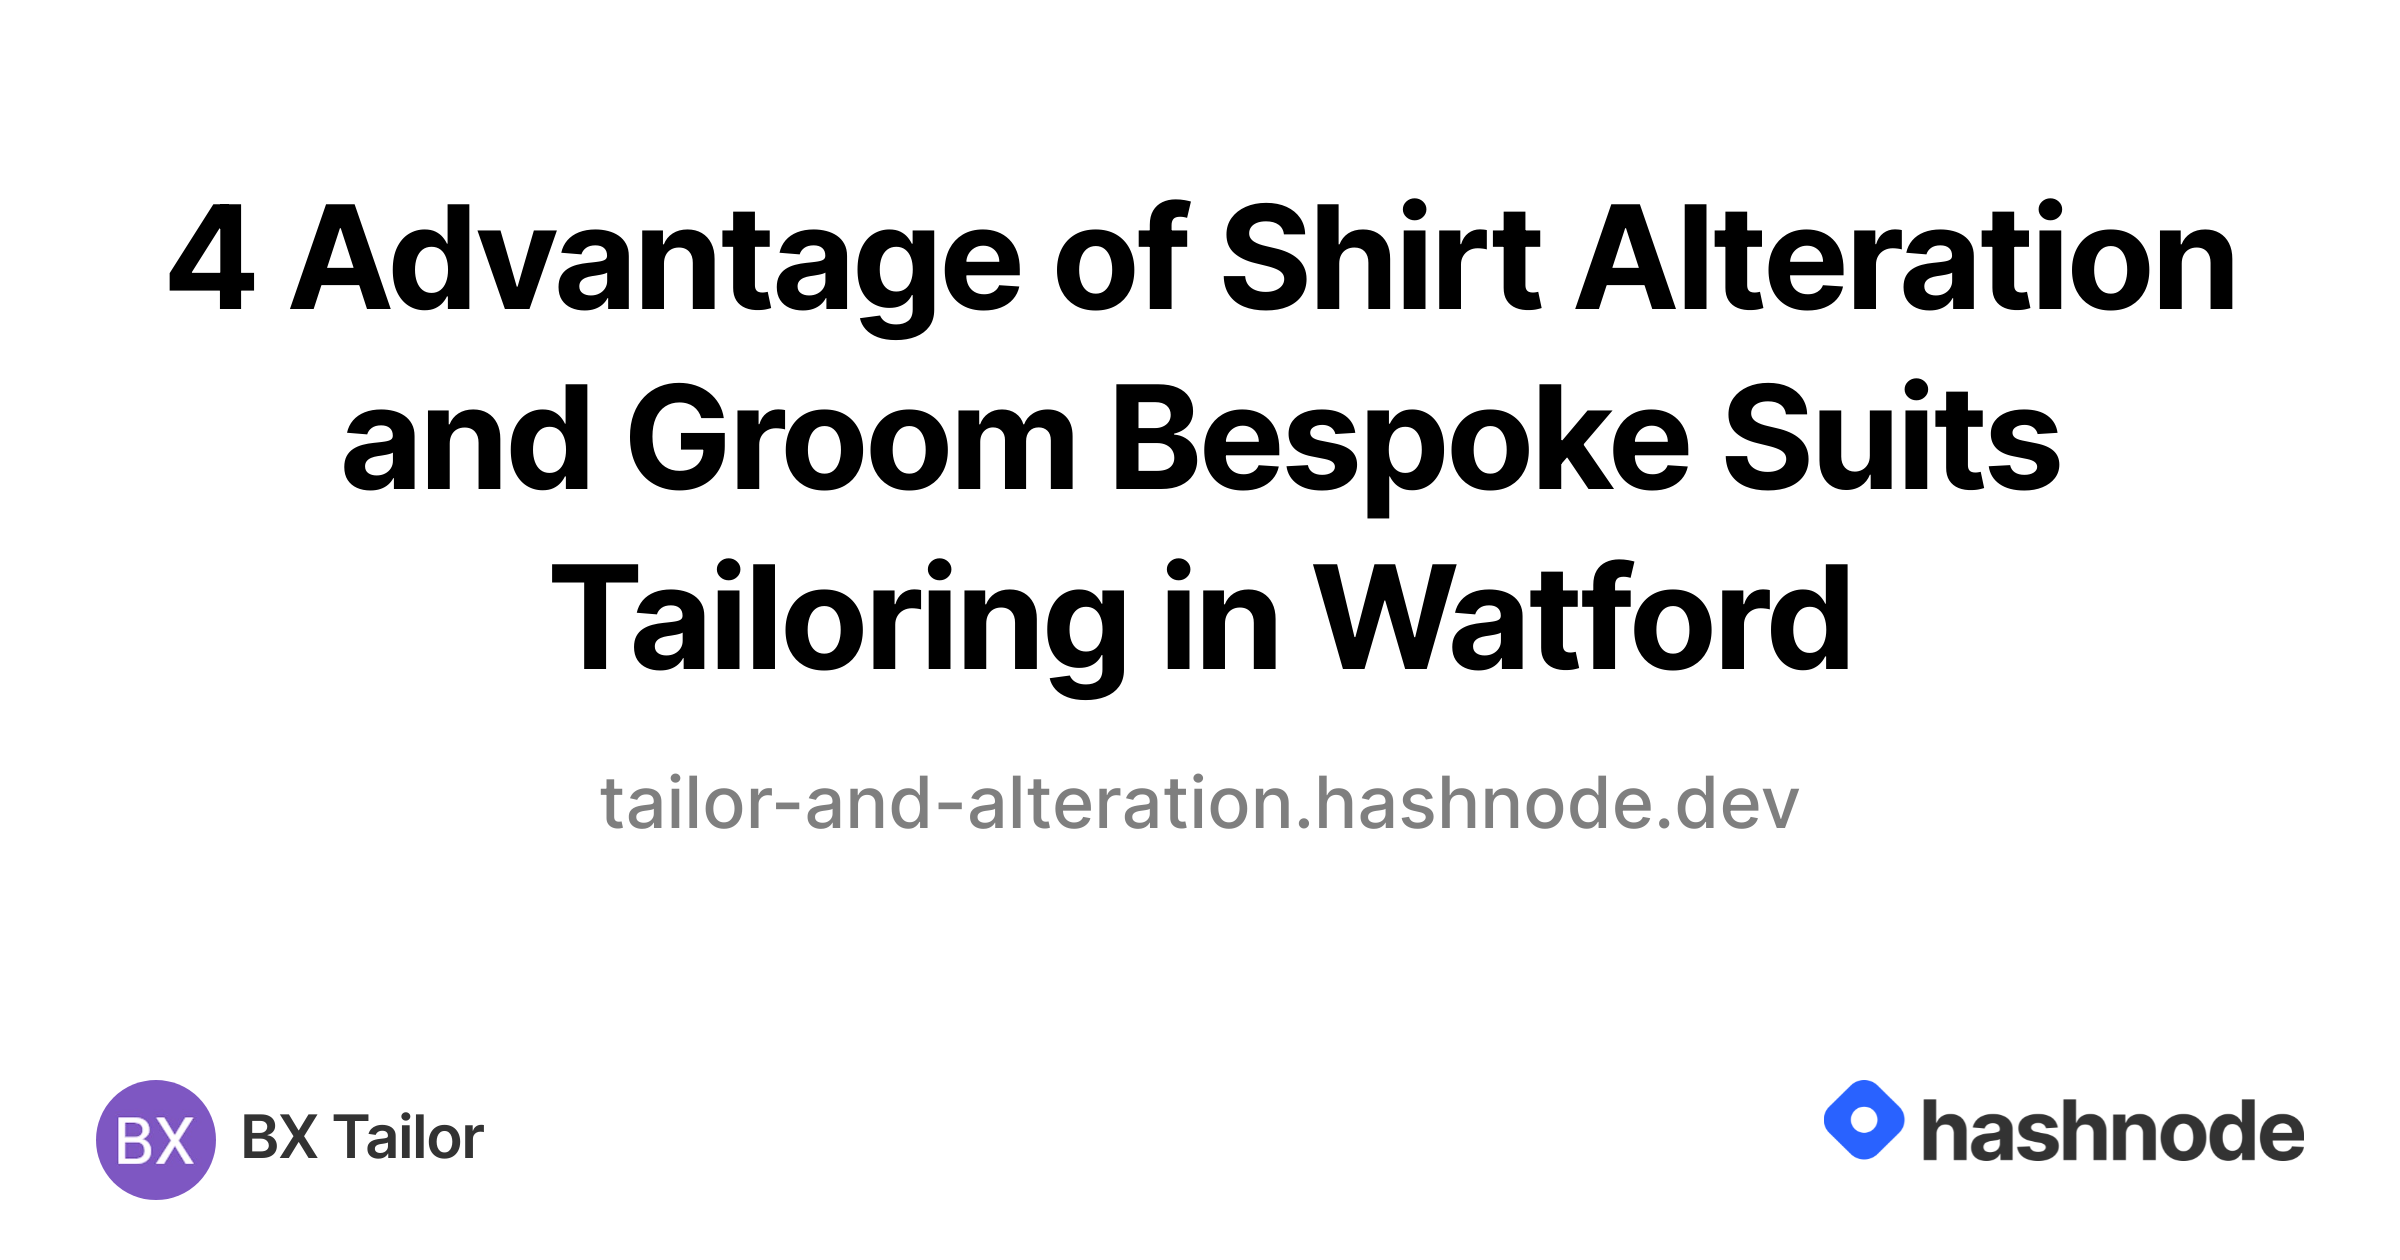 4 Advantage of Shirt Alteration and Groom Bespoke Suits Tailoring in W